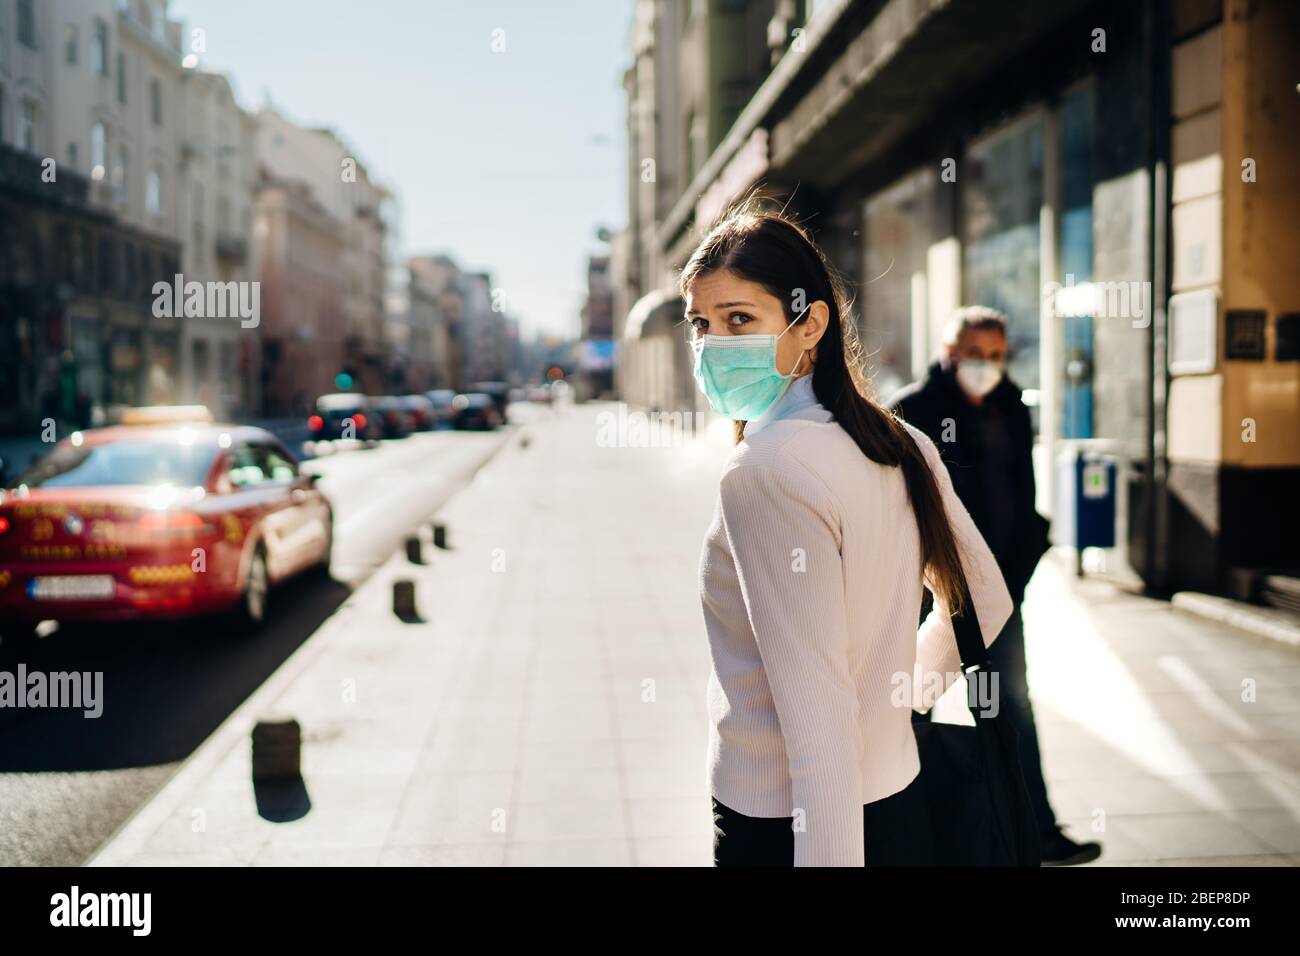 Anxious young adult affected by the COVID-19.Walking,going to work during pandemic.Protective measures,mask wearing.Respecting guidelines.Avoiding con Stock Photo